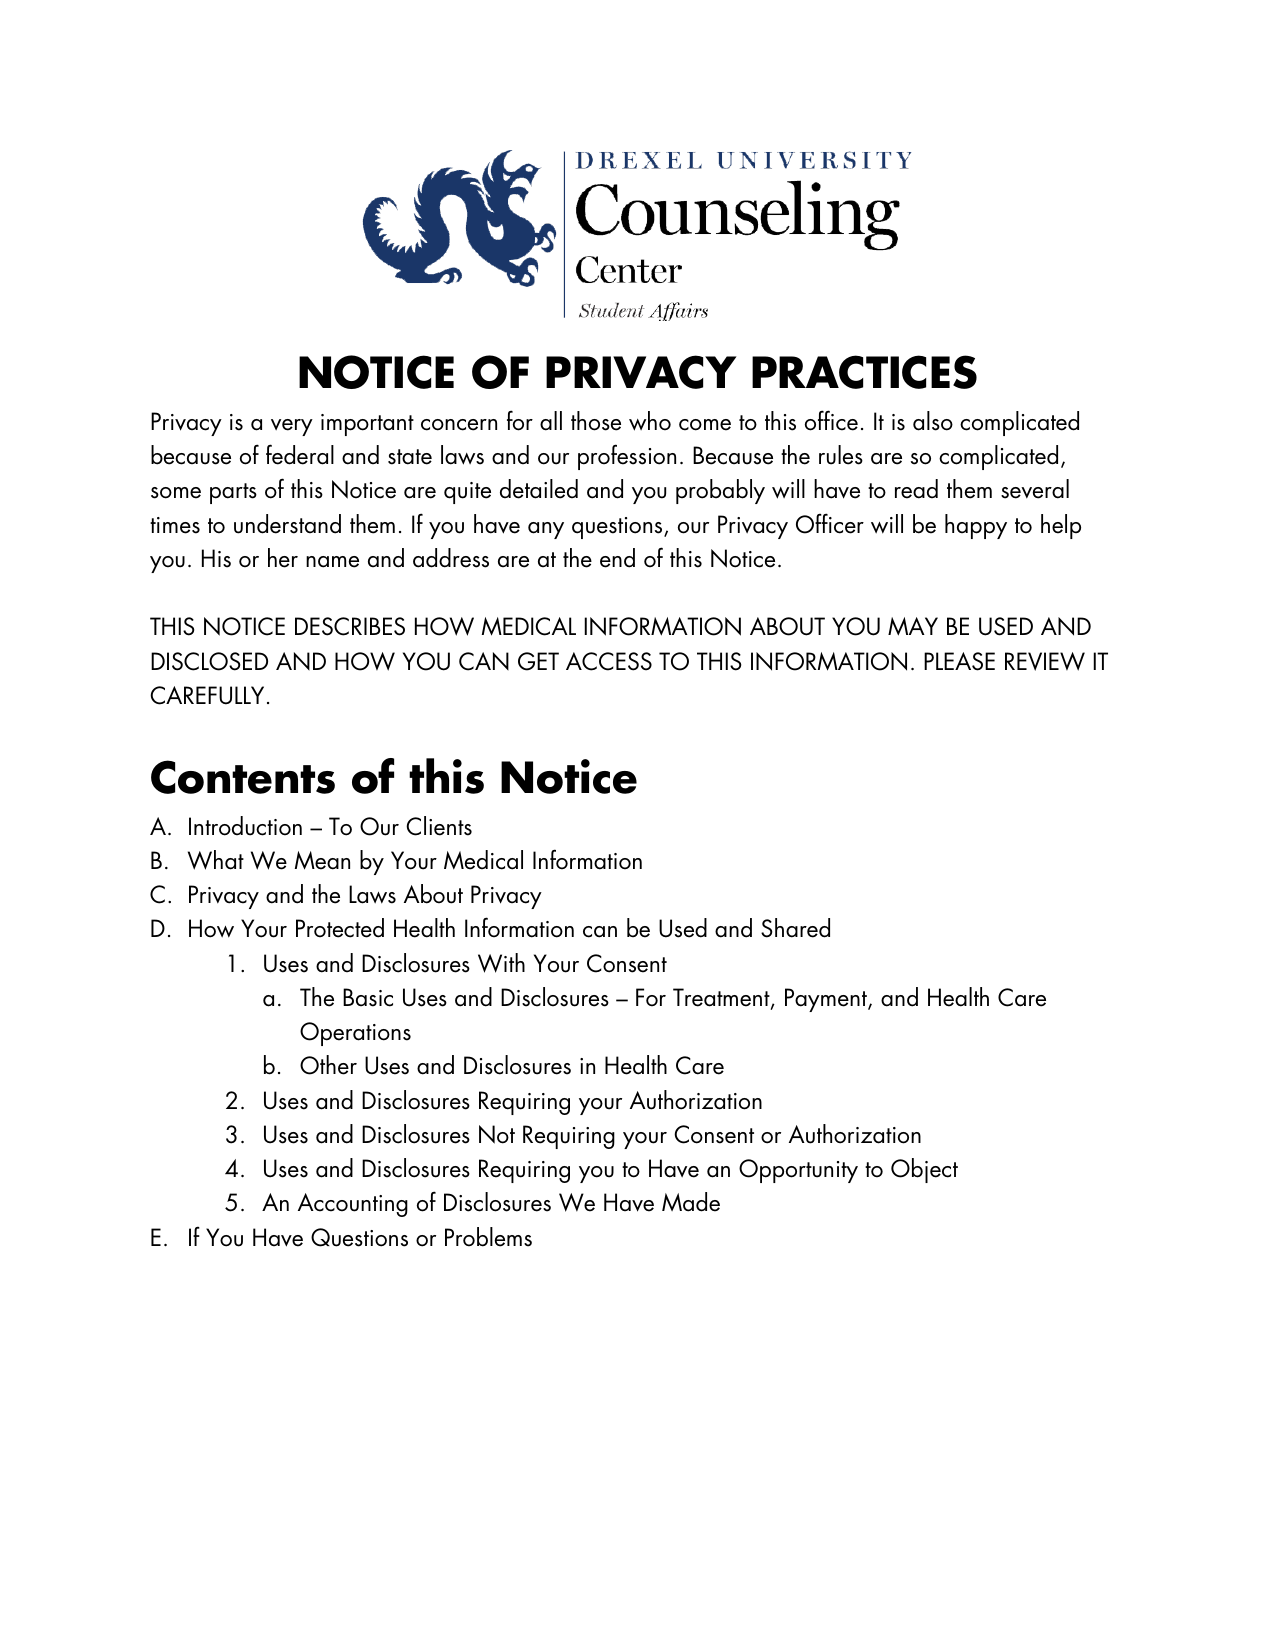 lab assignment 9 1 notice of privacy practices